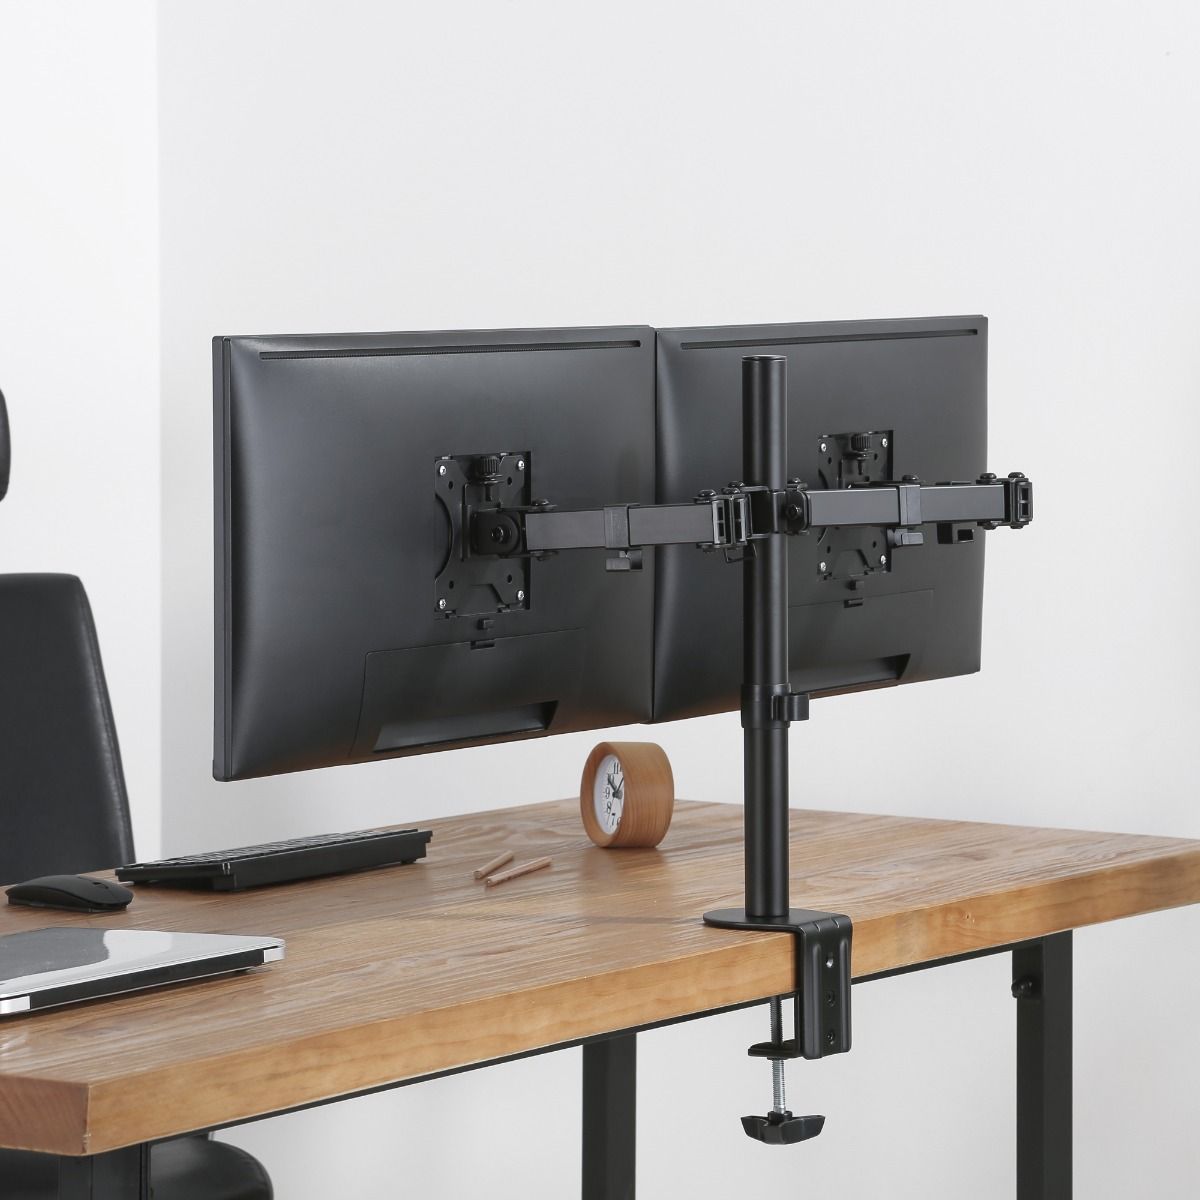 Ergolife Dual Monitor Screen Double Joint Monitor Arm